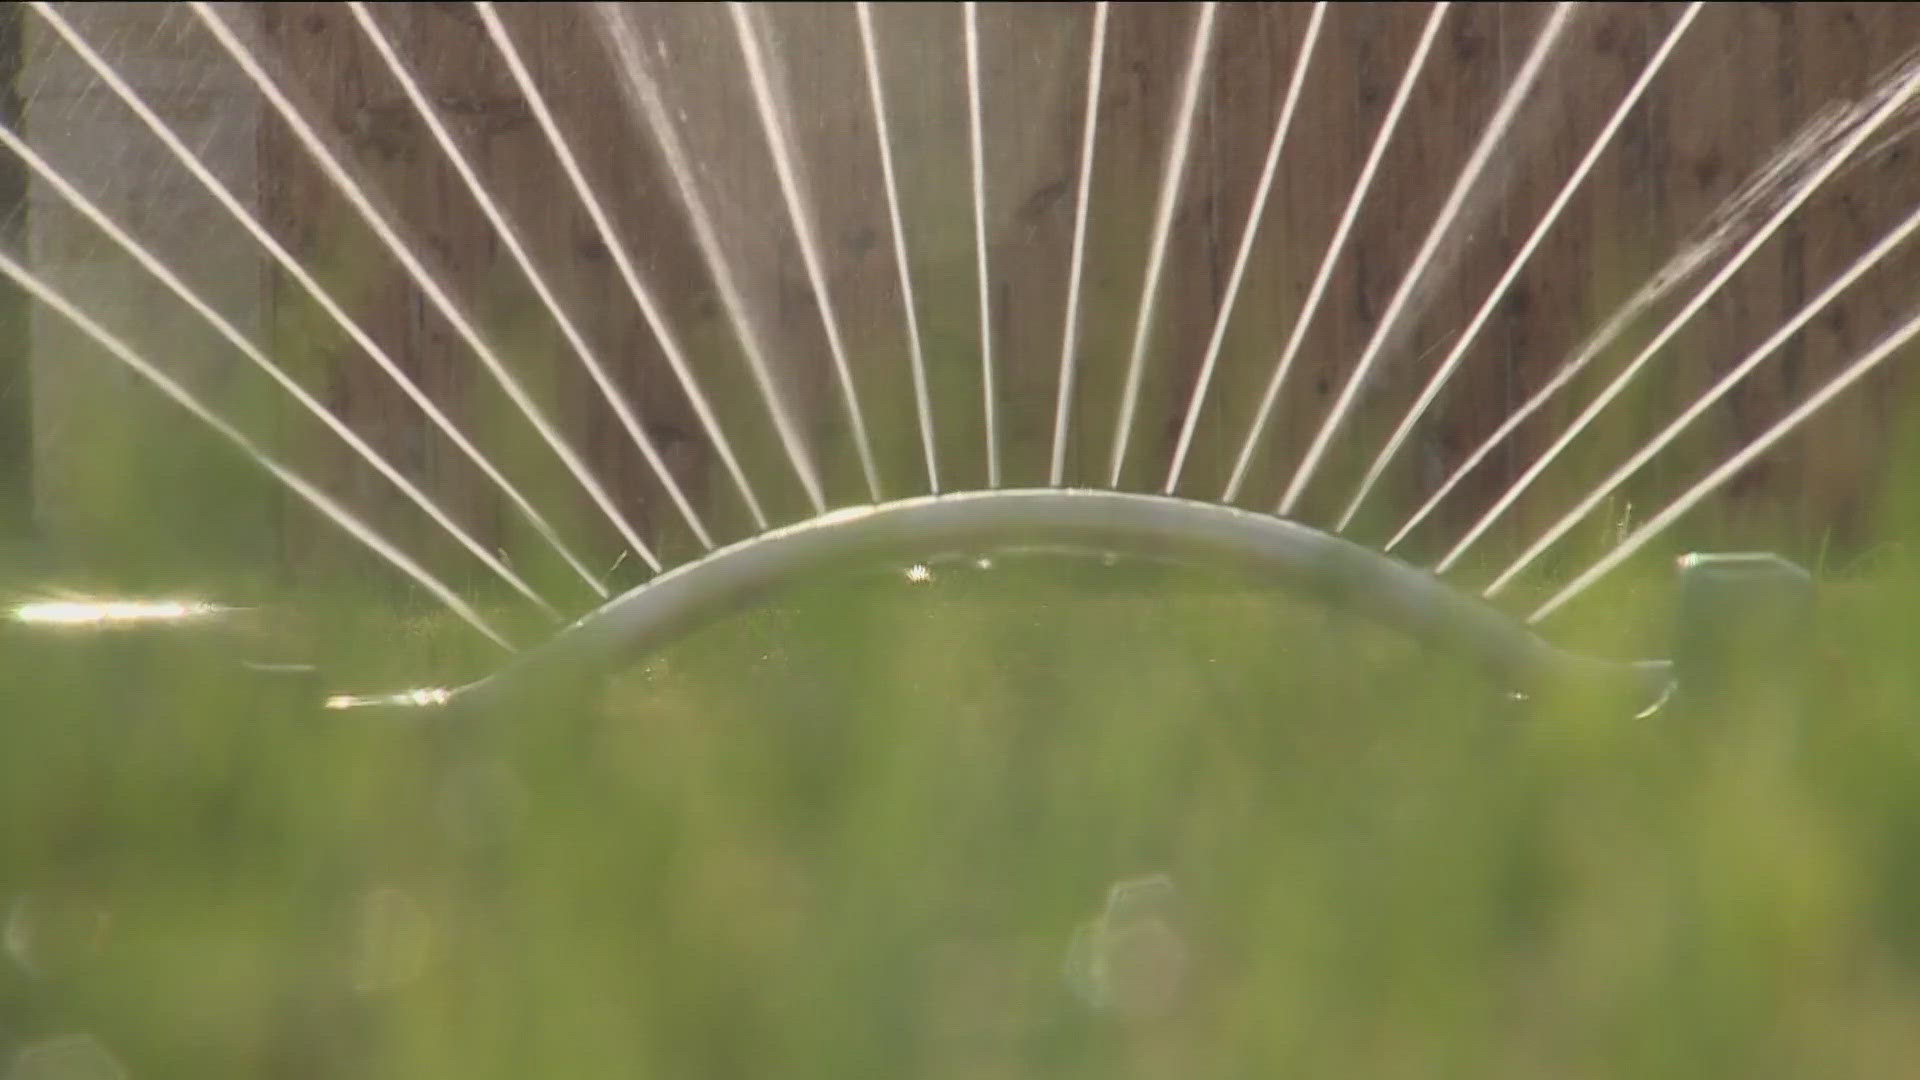 Austin Water customers can get up to $3,000 if they change their landscapes to help conserve water.